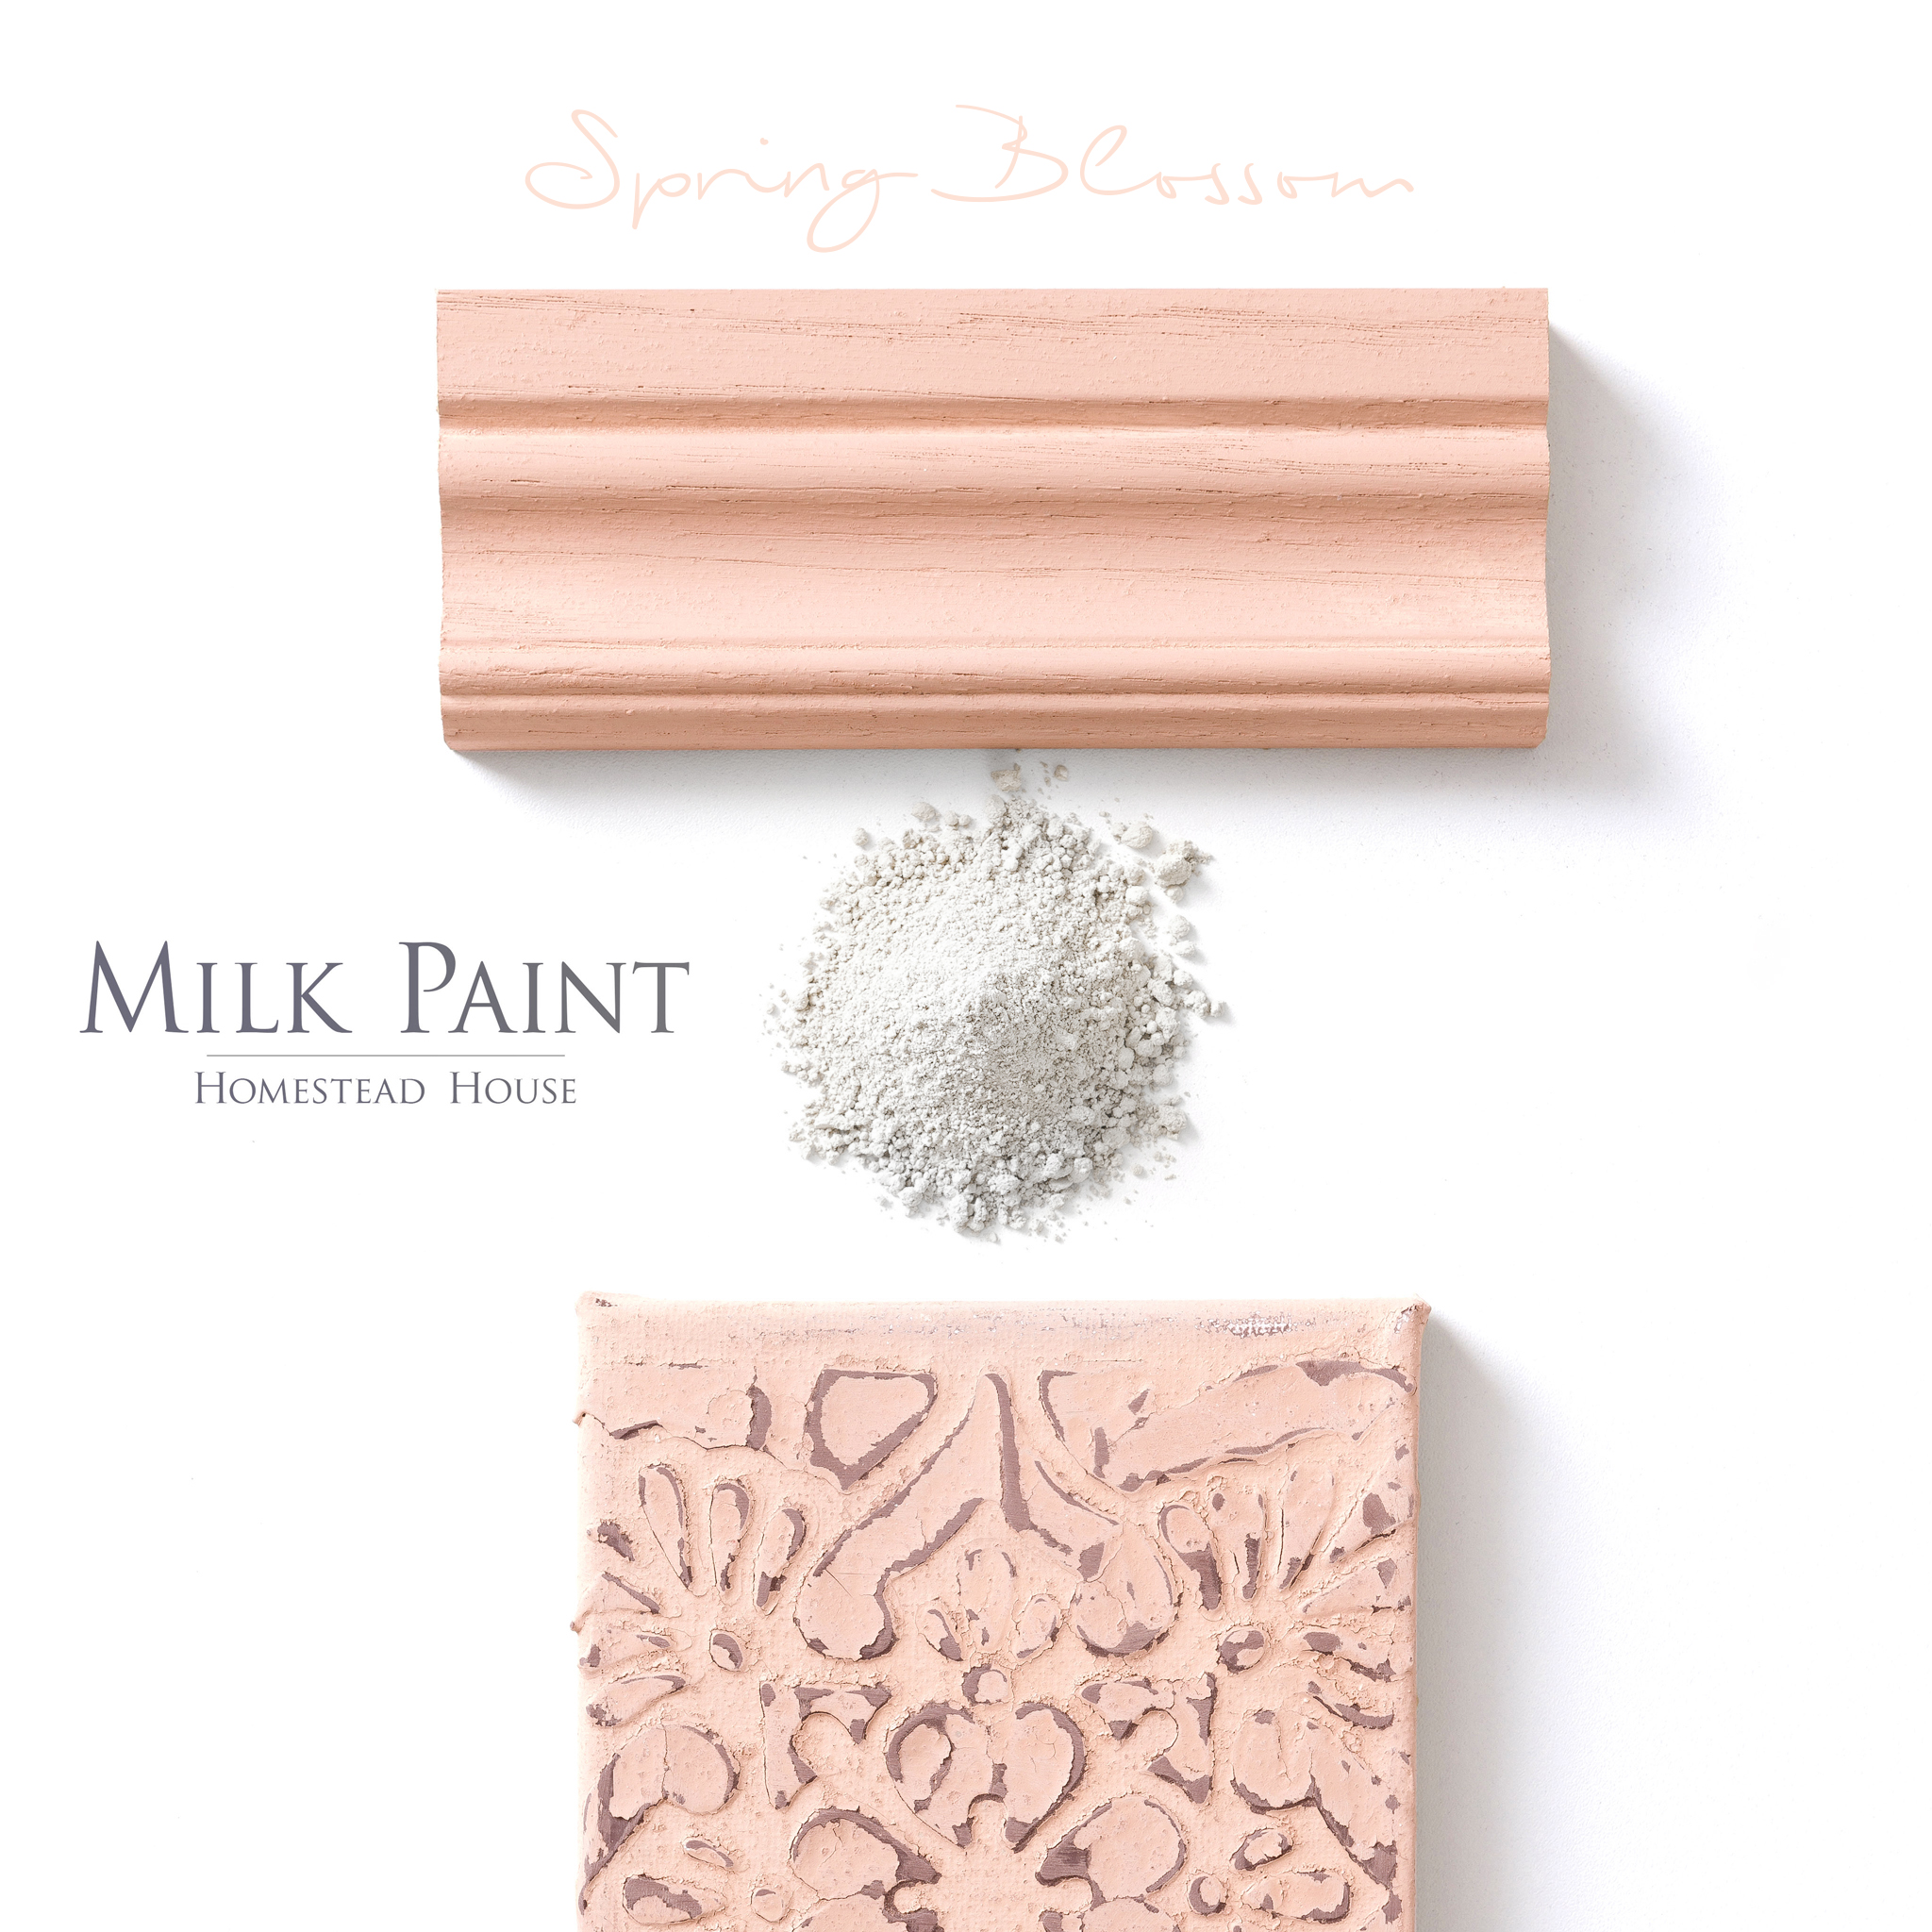 Spring Blossom milk paint flat lay, pile of powdered milk paint and painted trim